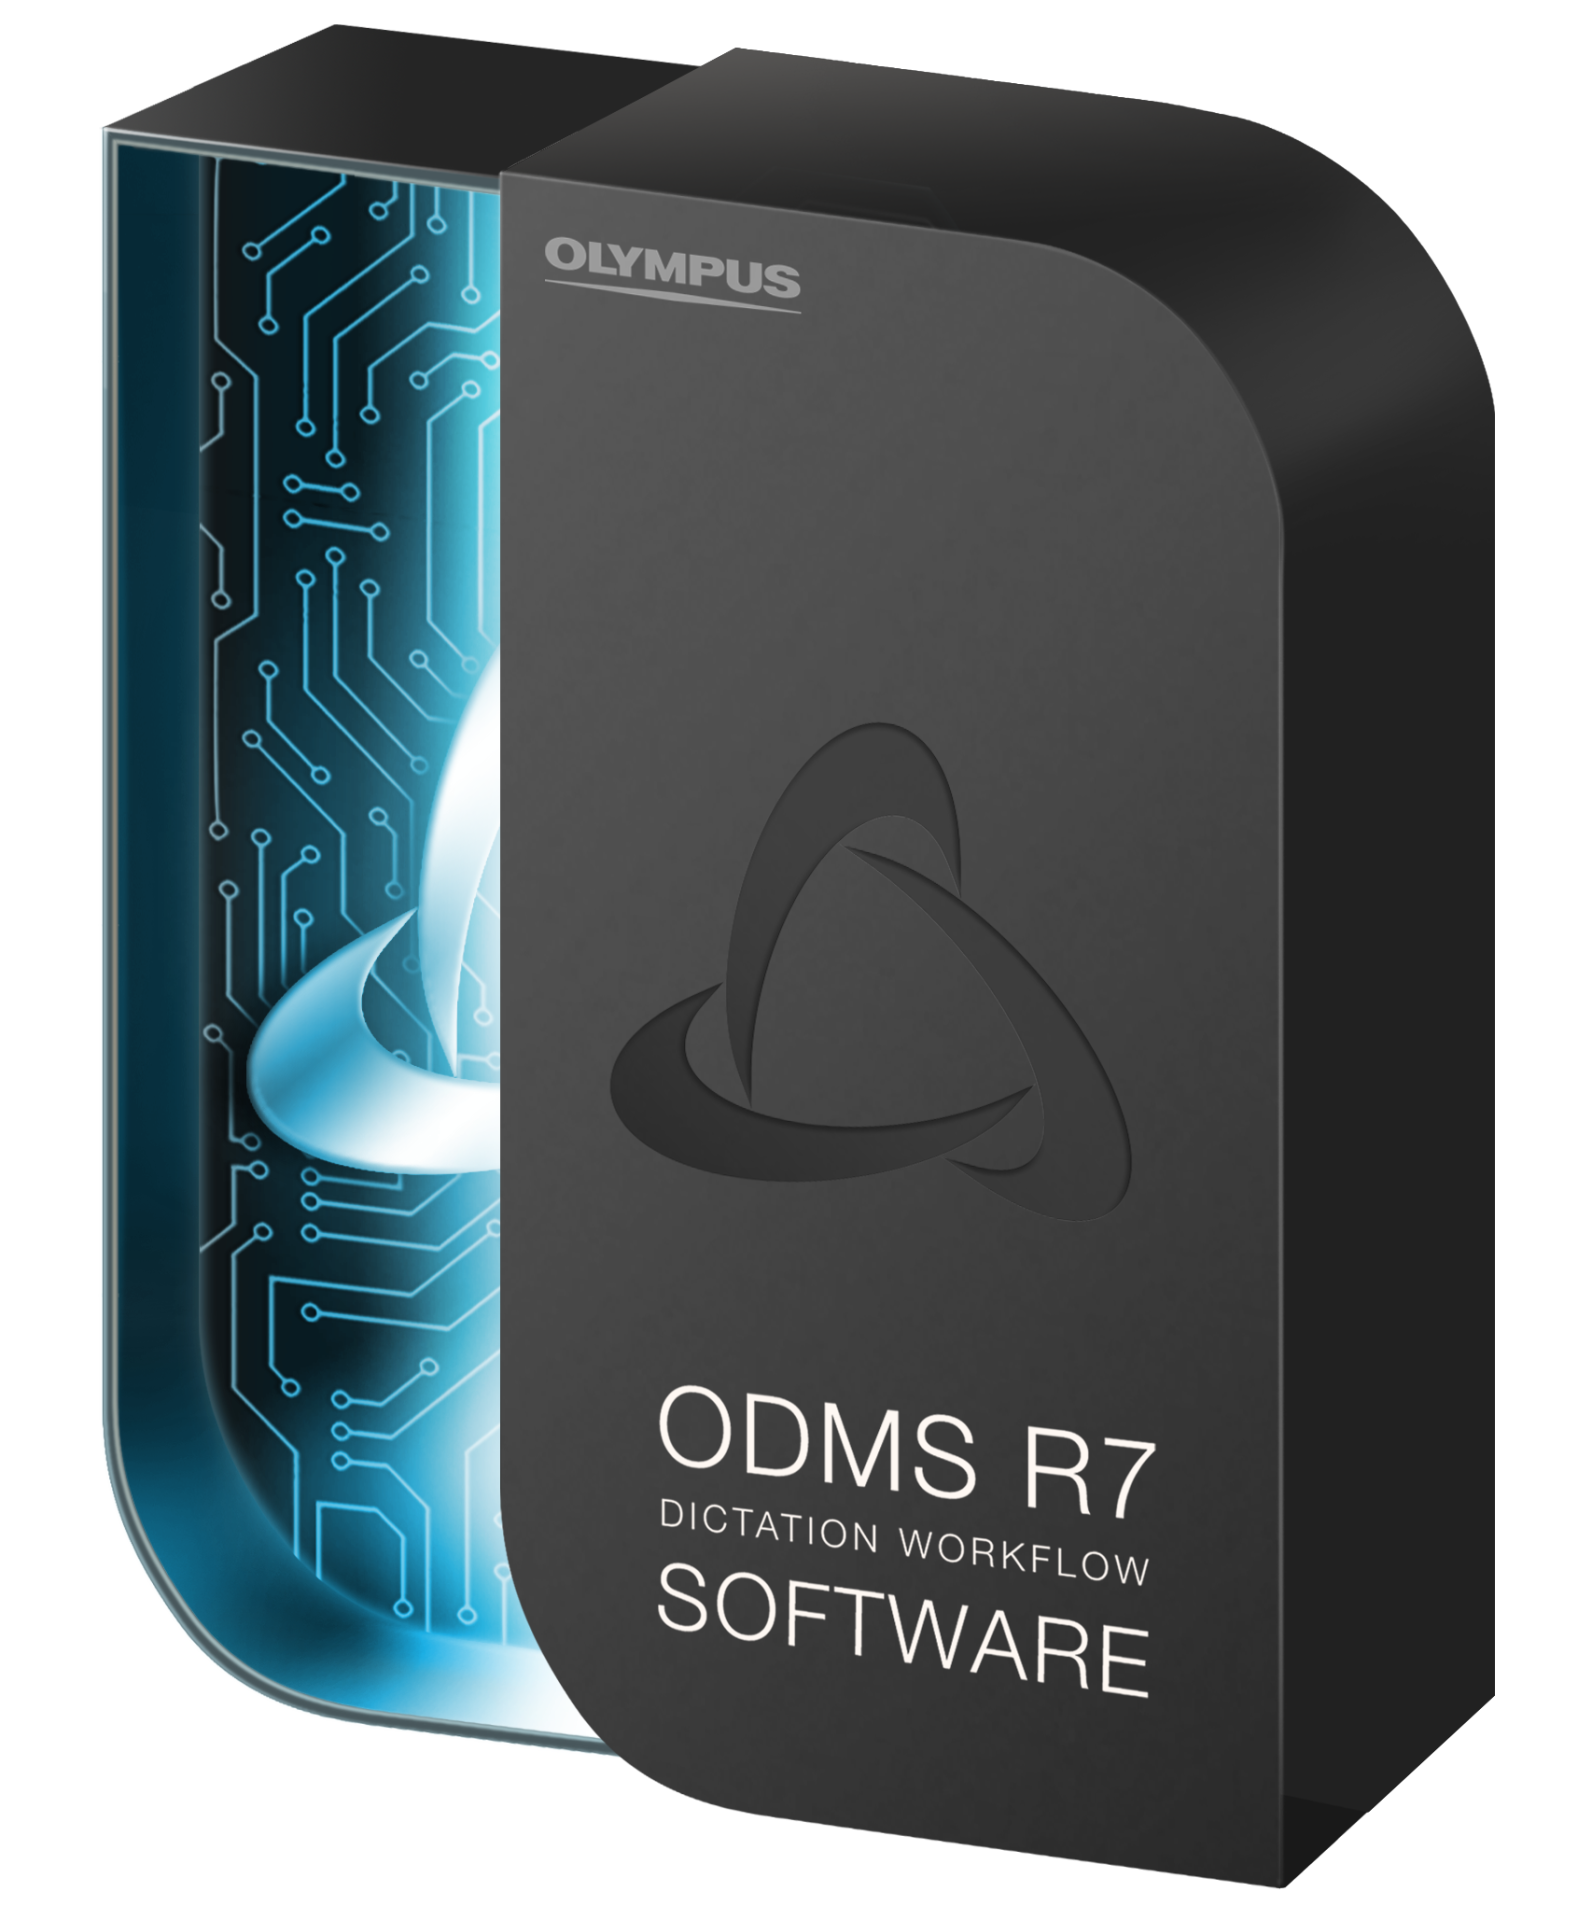 Olympus Dictation Management System (ODMS) R7